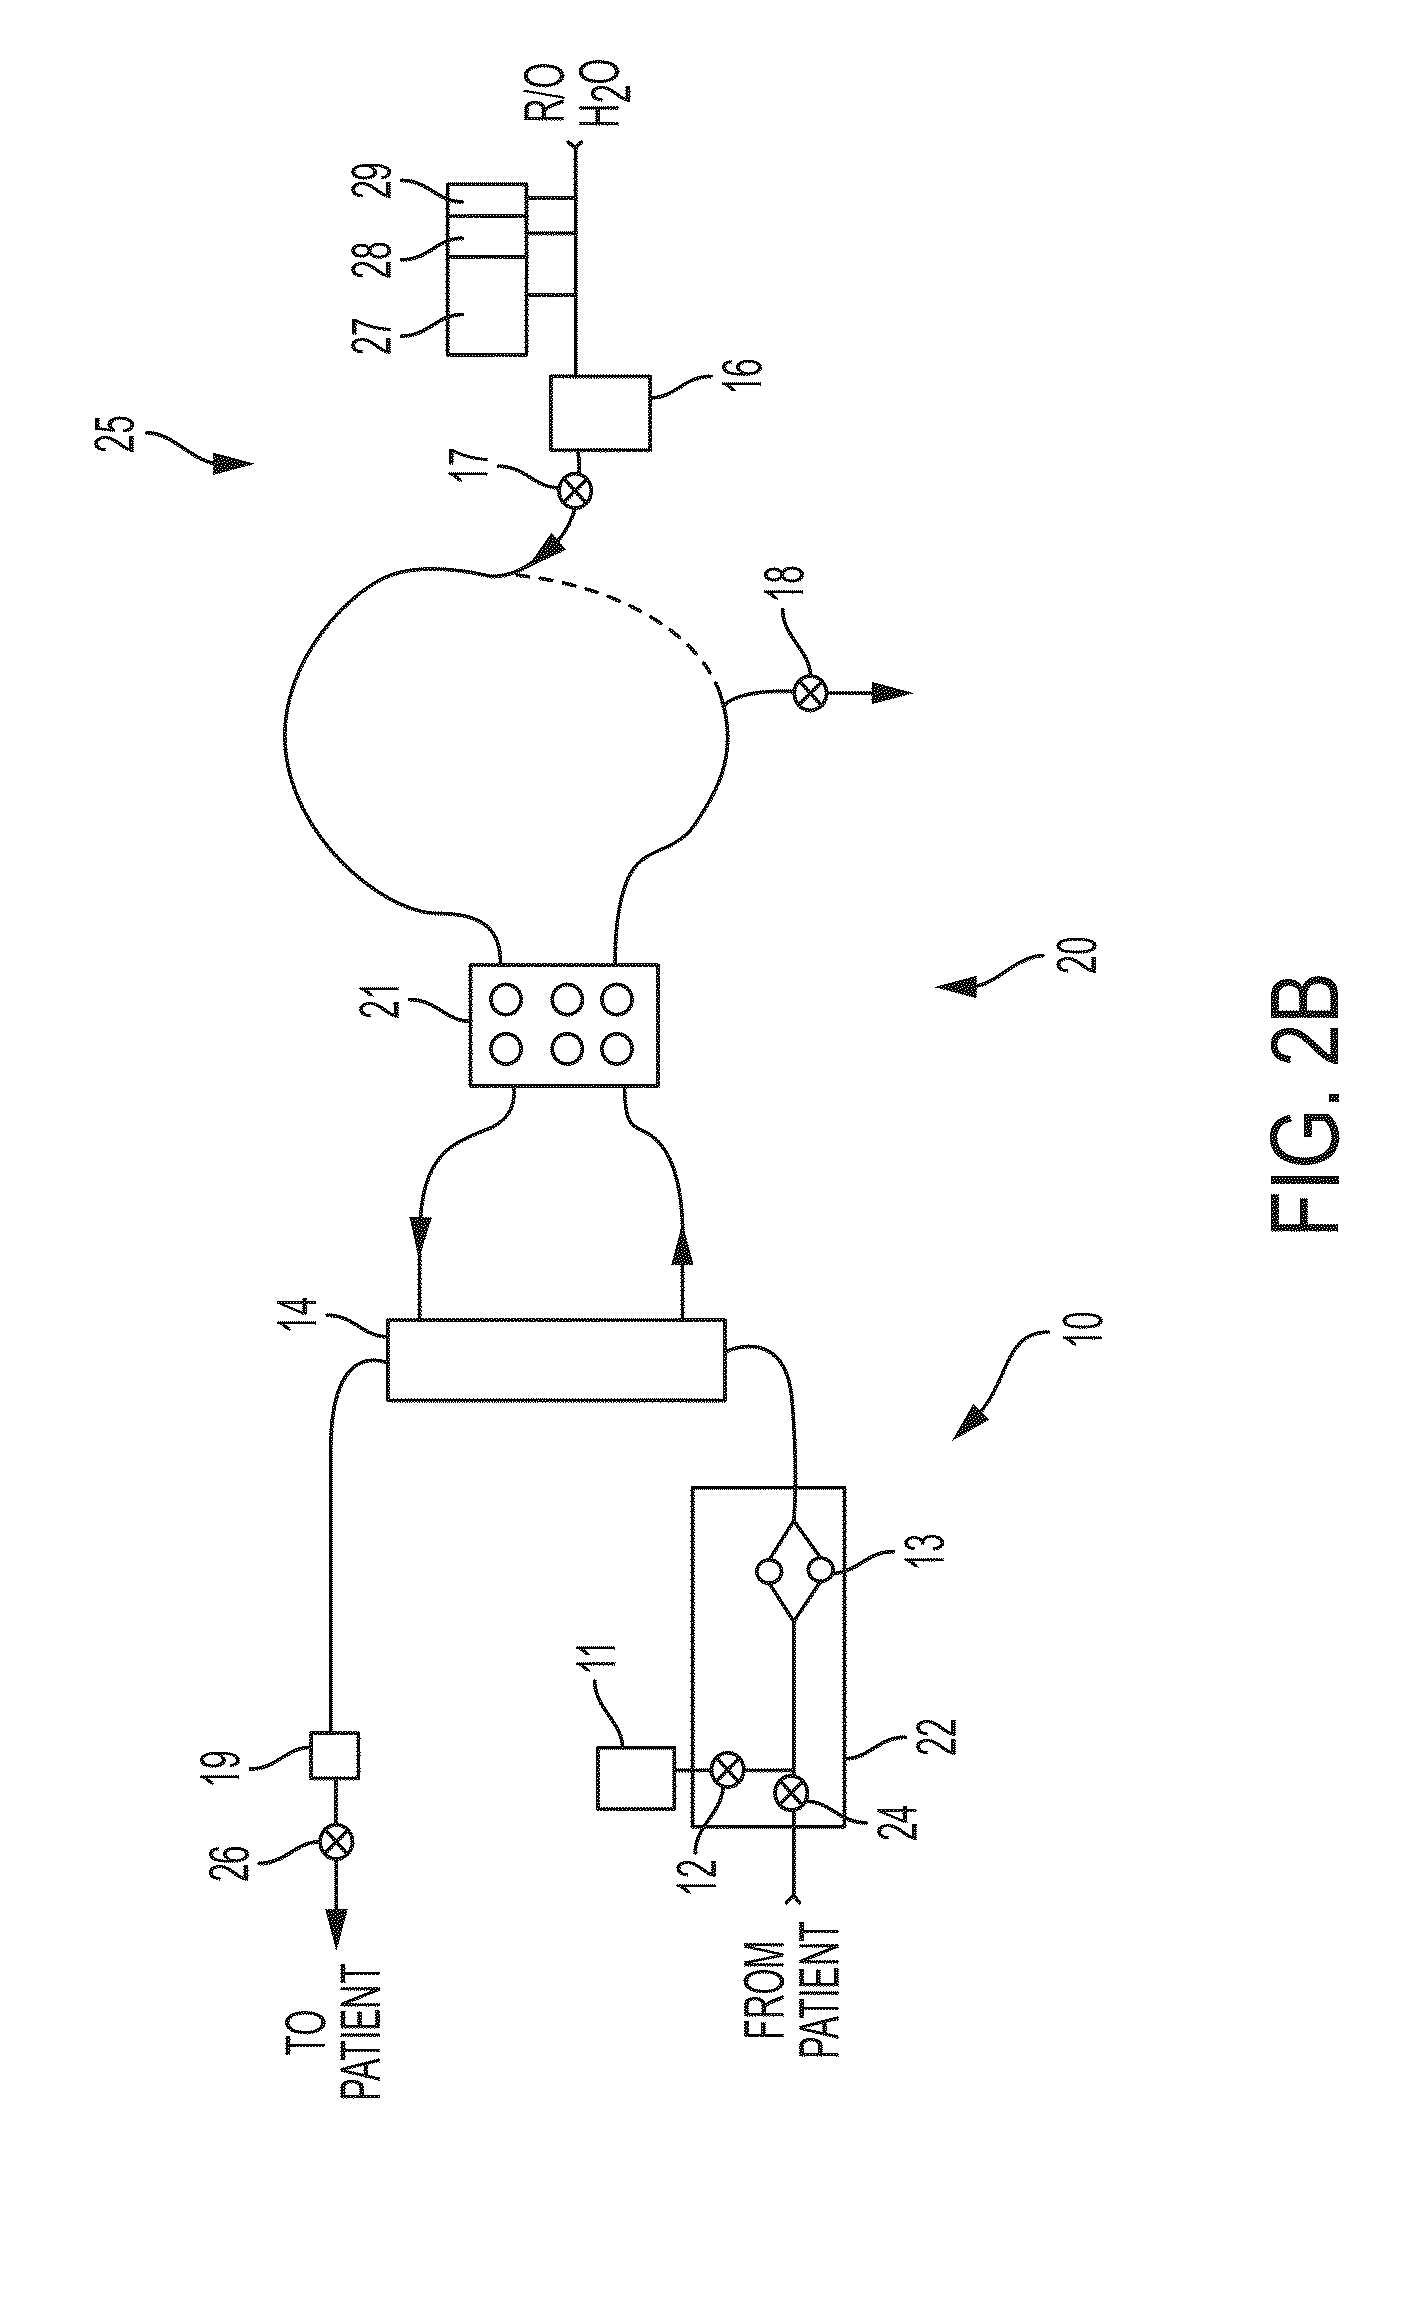 Control Systems and Methods for Blood or Fluid Handling Medical Devices